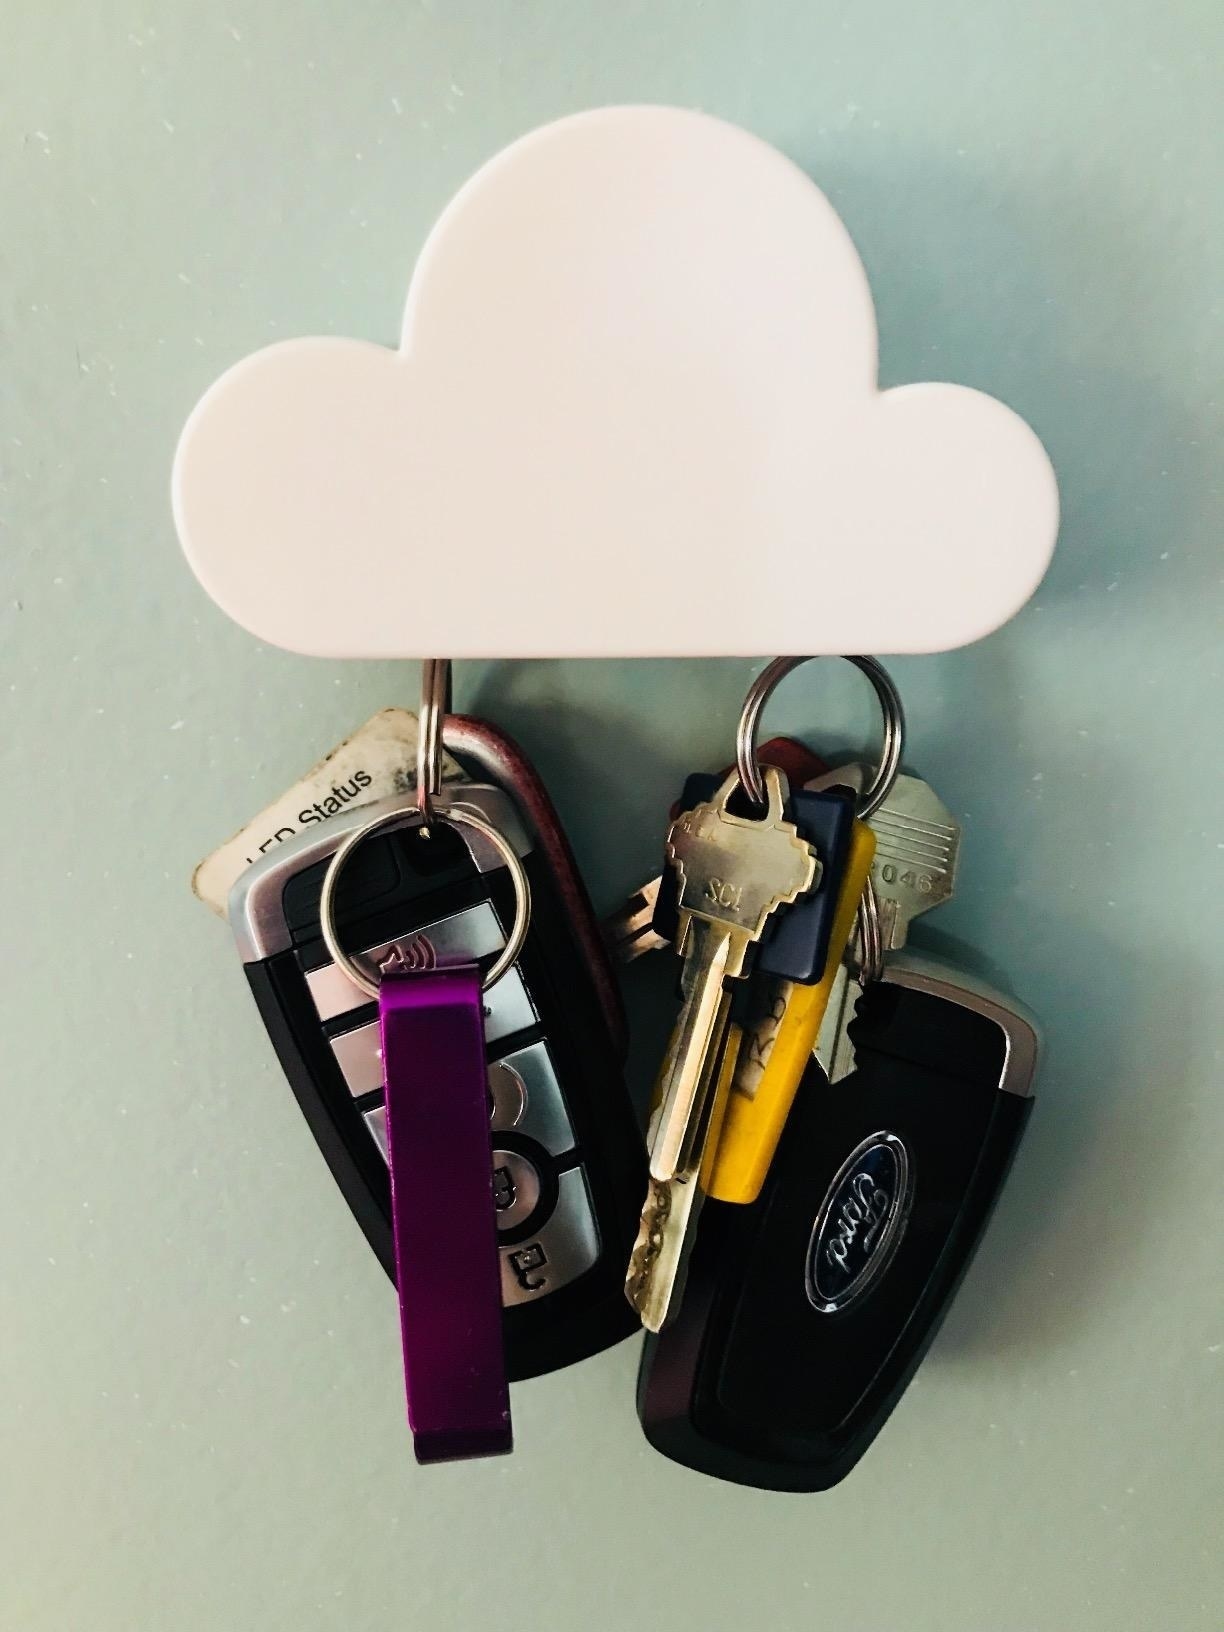 A minimalist cloud magnet tacked to a wall holding two sets of car keys 